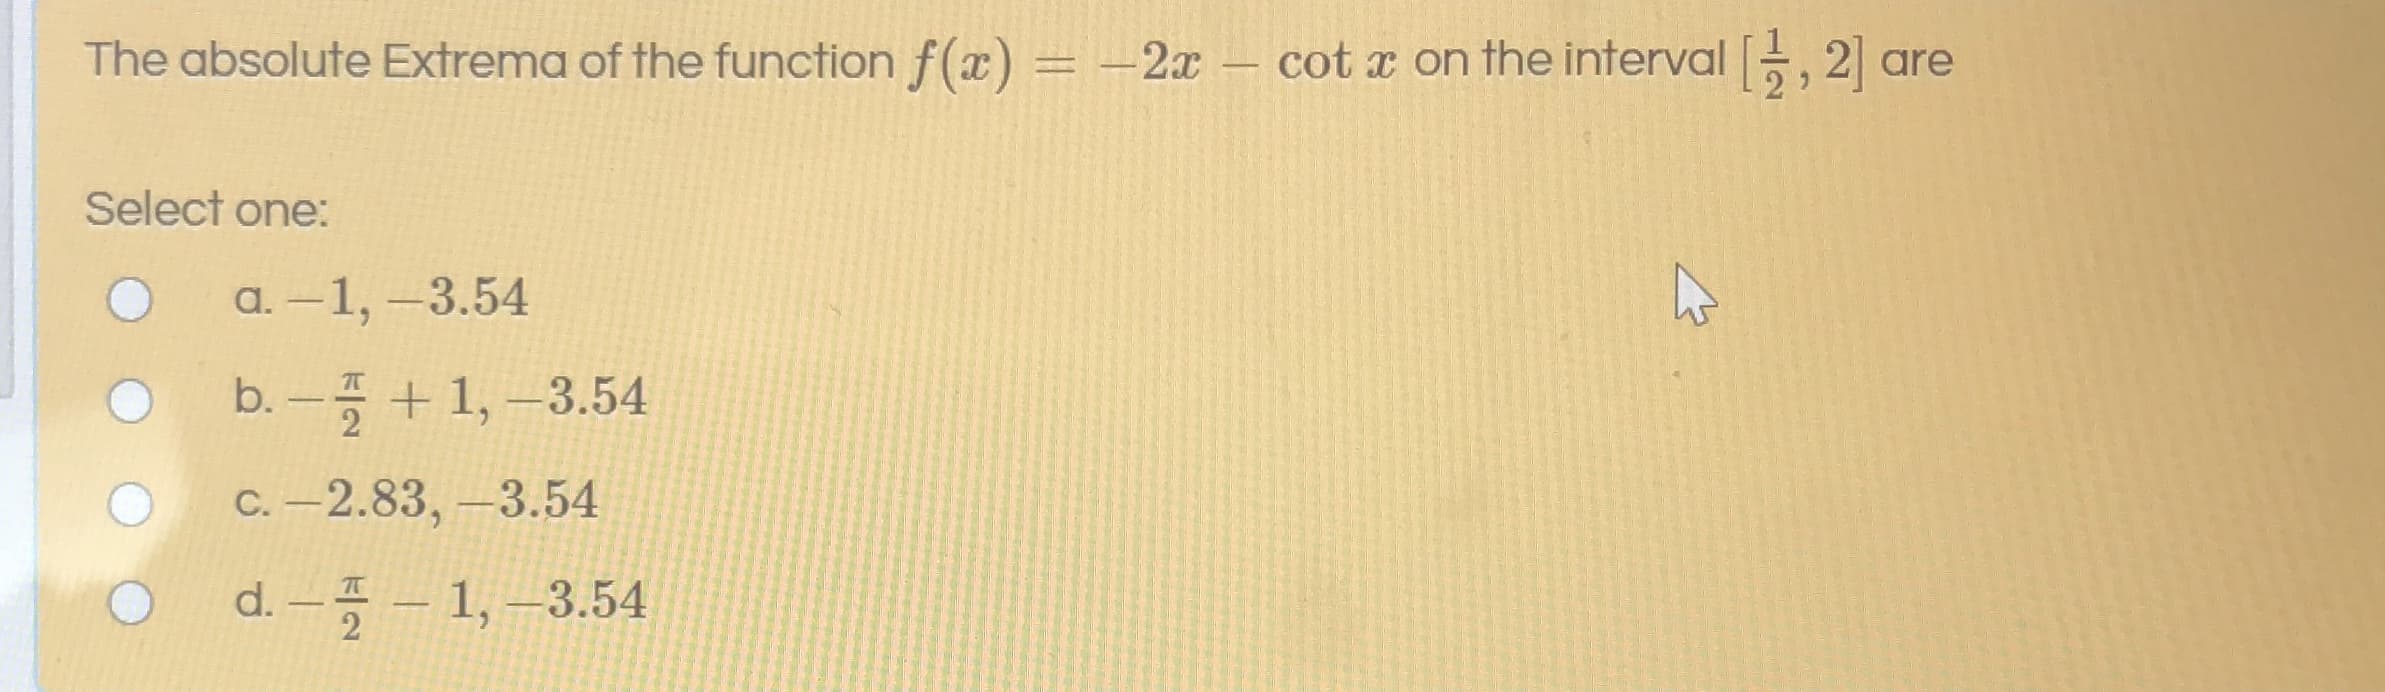 The absolute Extrema of the function f(x) = -2x – cot x on the interval -, 2] a
%3D
Select one:
a. –1, –3.54
|
b.-플 + 1,-3.54
C. –2.83, –3.54
d.-풍- 1, -3.54
